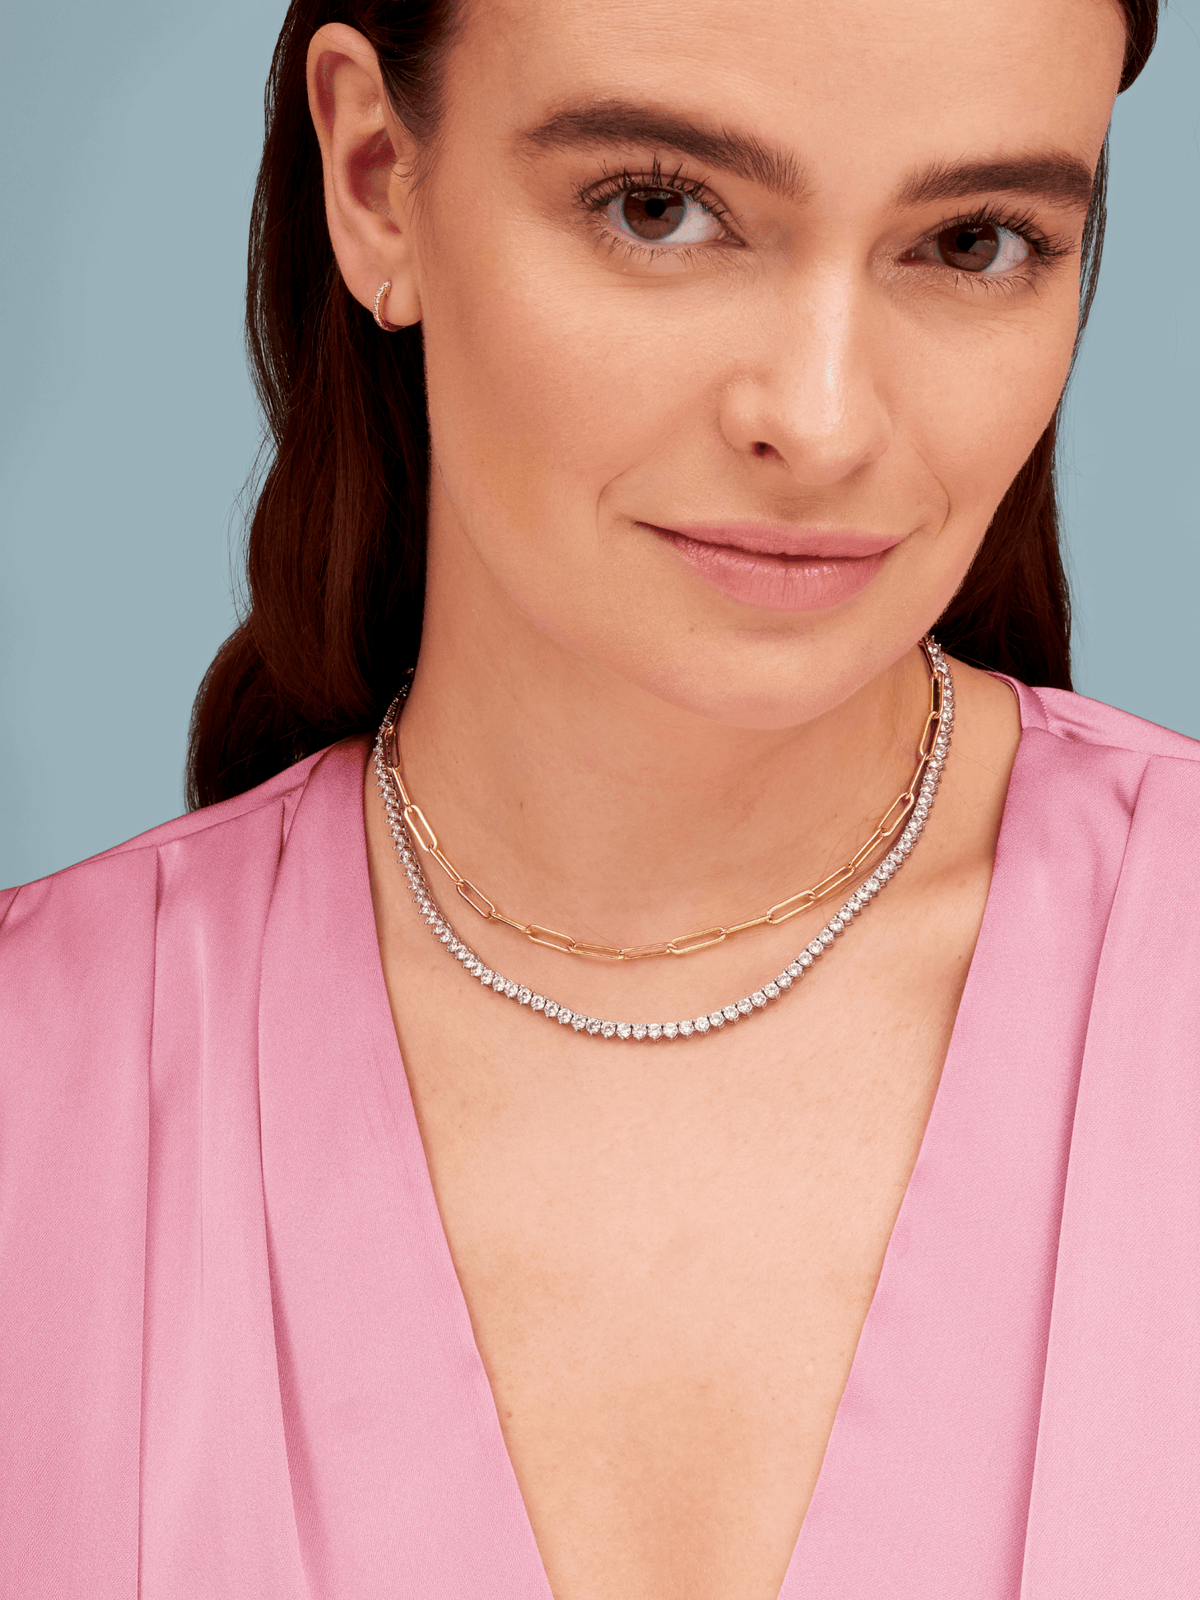 Silver graduated cz choker layered with gold paperclip necklace